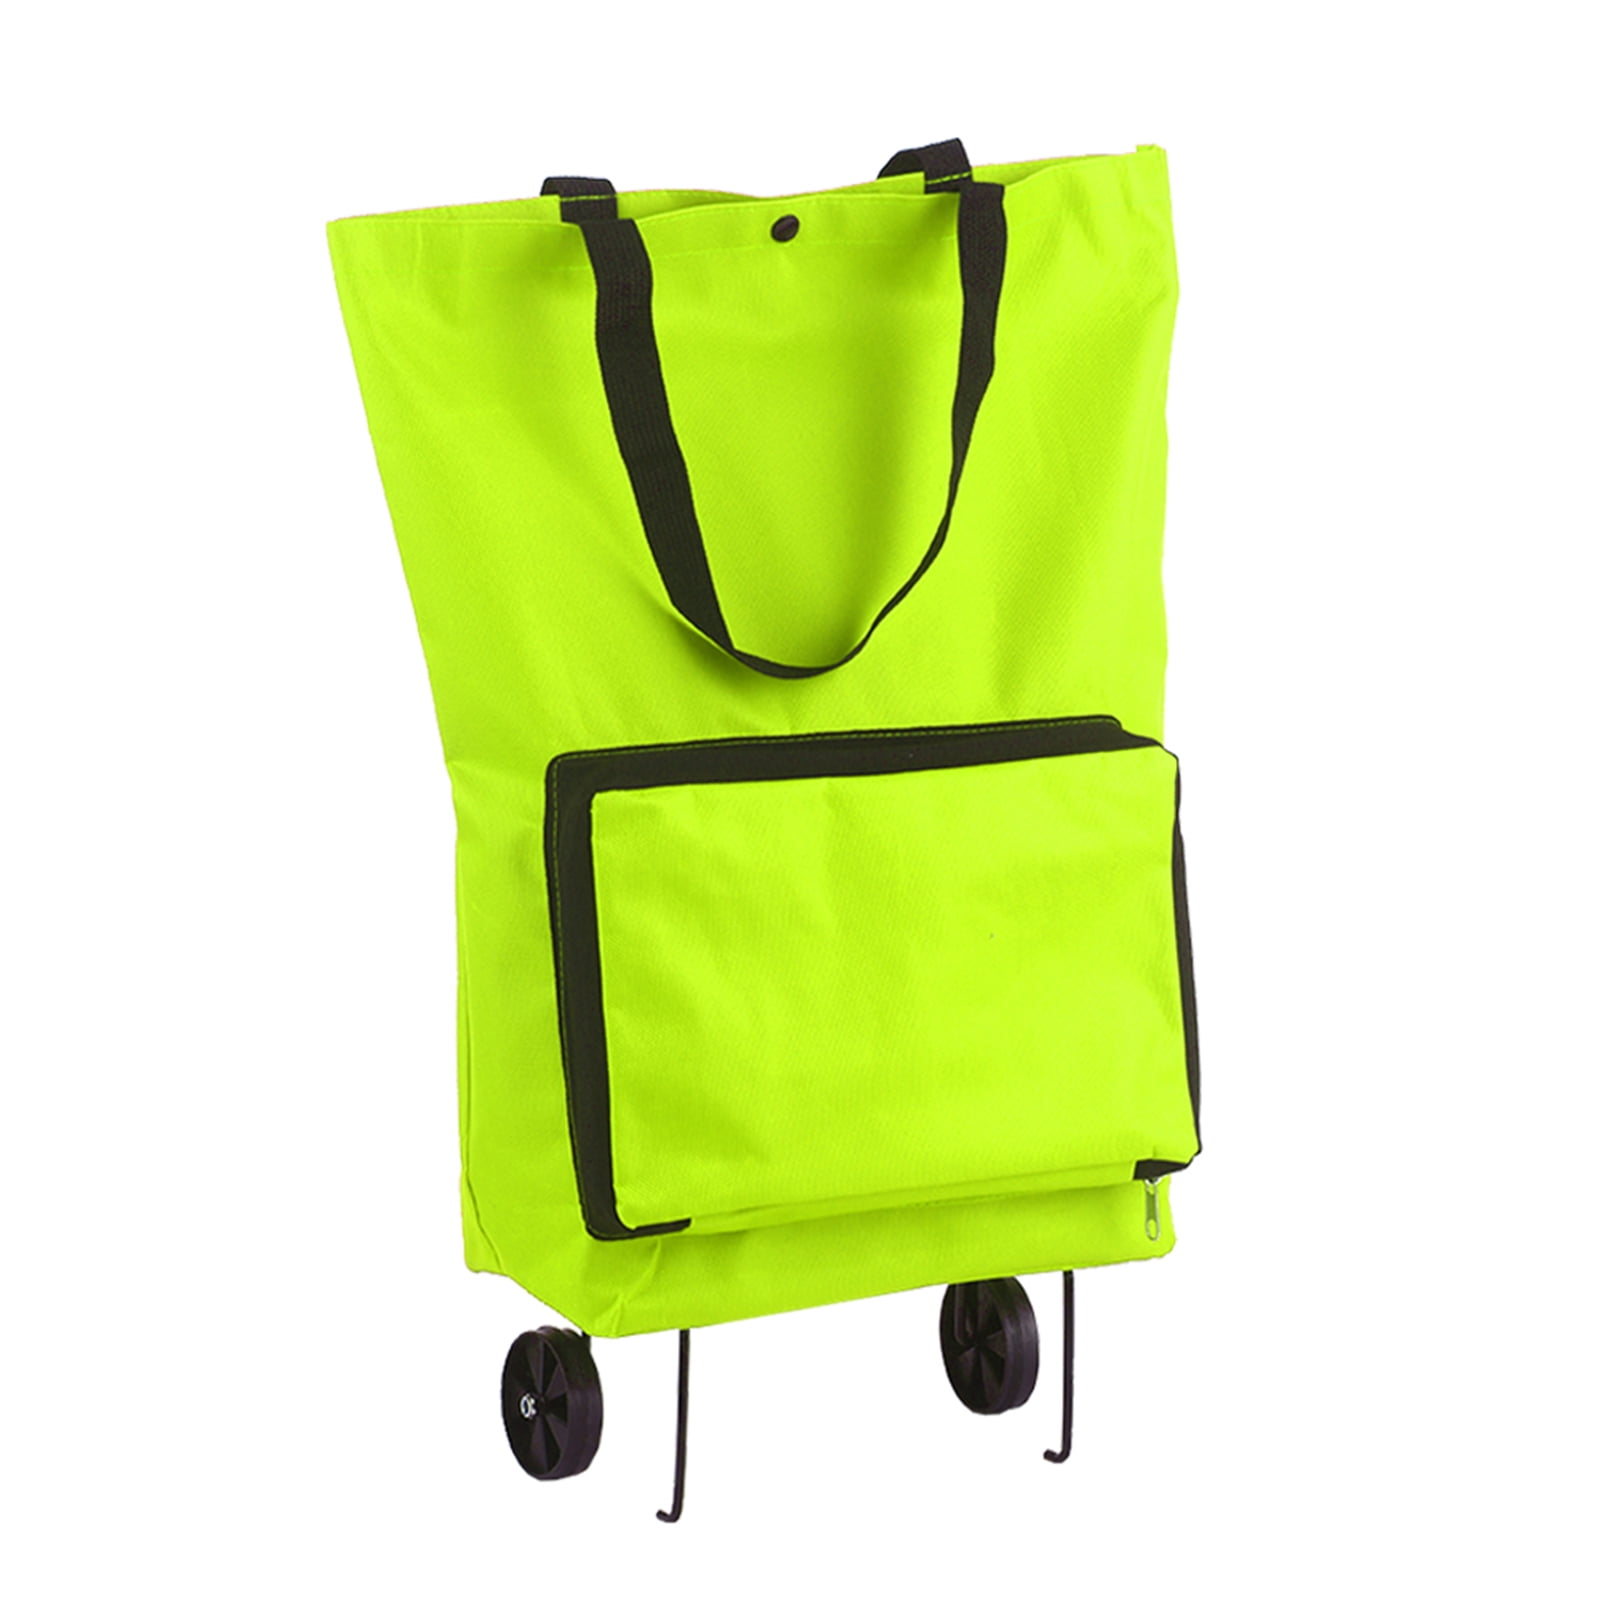 Details about   Foldable Portable Shopping Storage Bags Trolley Tote Food Grocery Cart On Wheels 